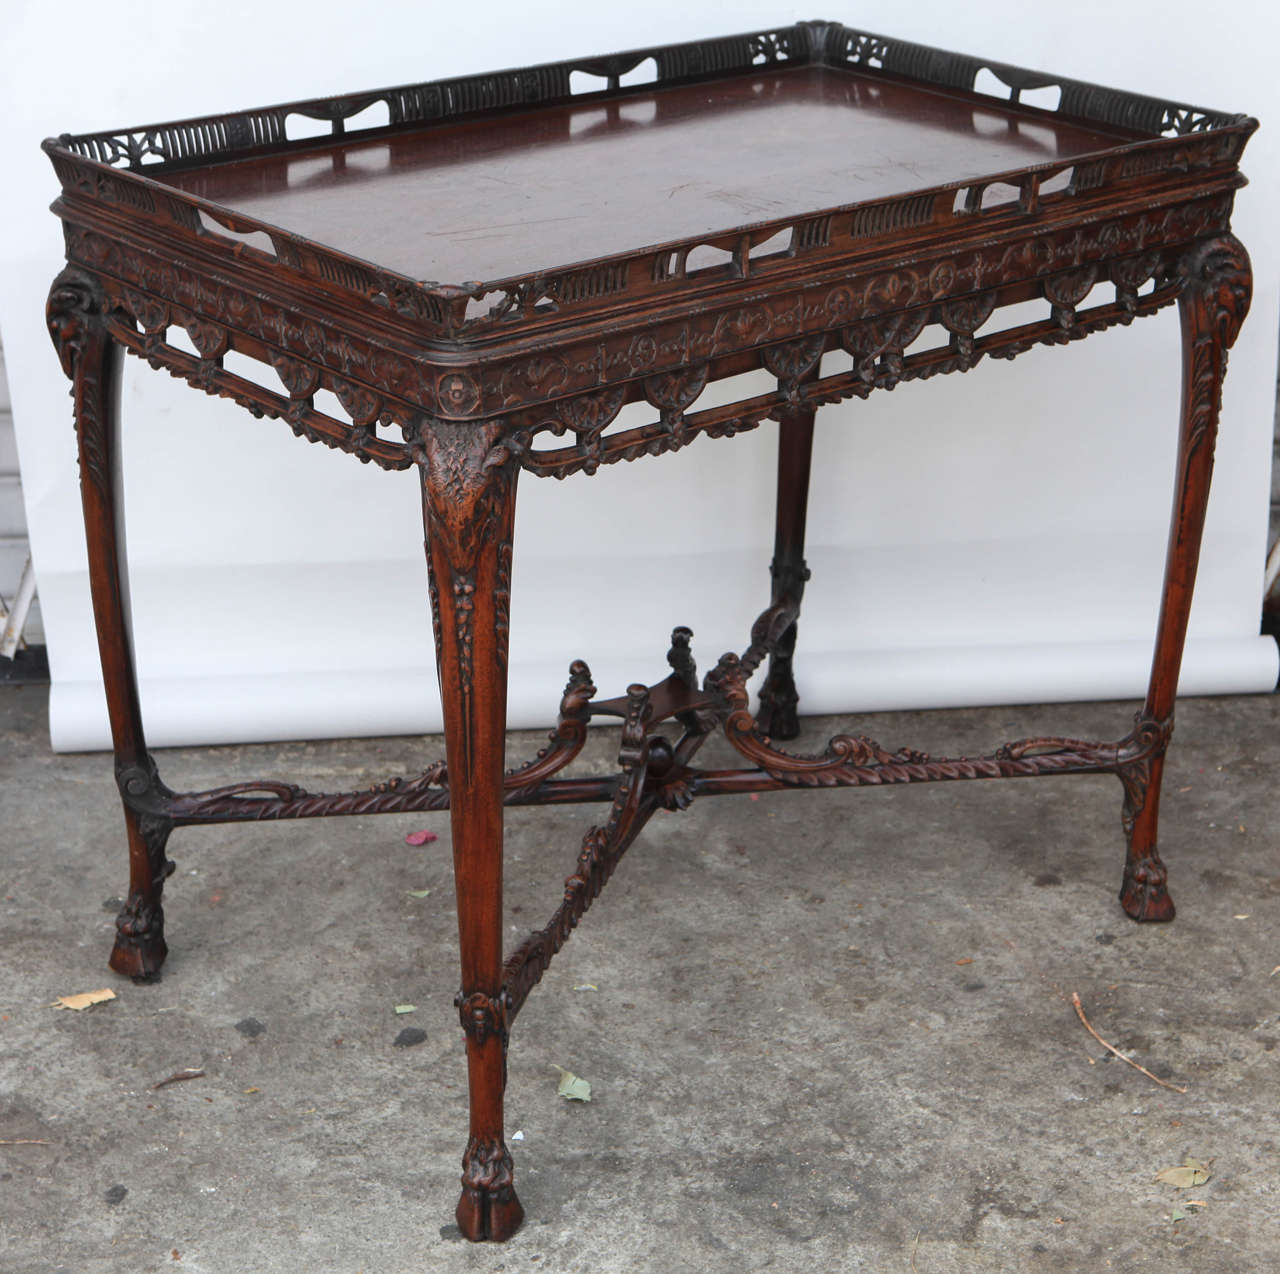 Late 19th century English finely carved mahogany tea table with stretcher. This table features ram's heads and a beautifully carved wood gallery.